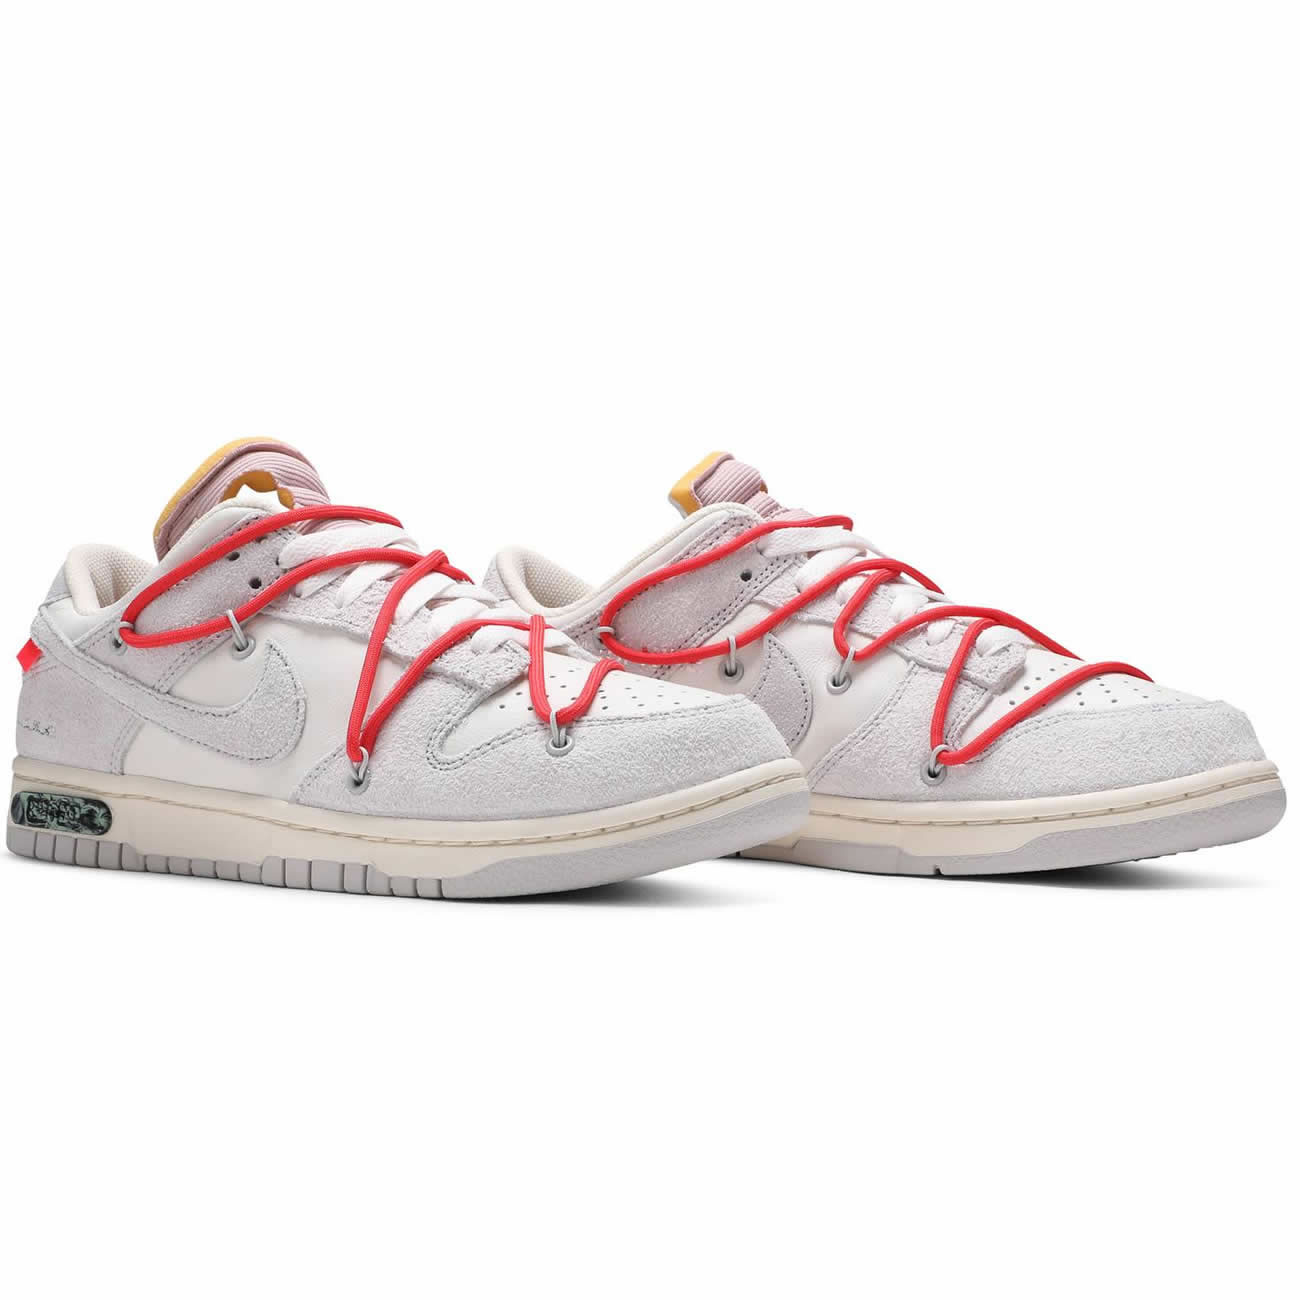 Off White Nike Sb Dunk Low Lot 33 Of 50 Sail Neutral Grey Chile Red Dj0950 118 (3) - newkick.org